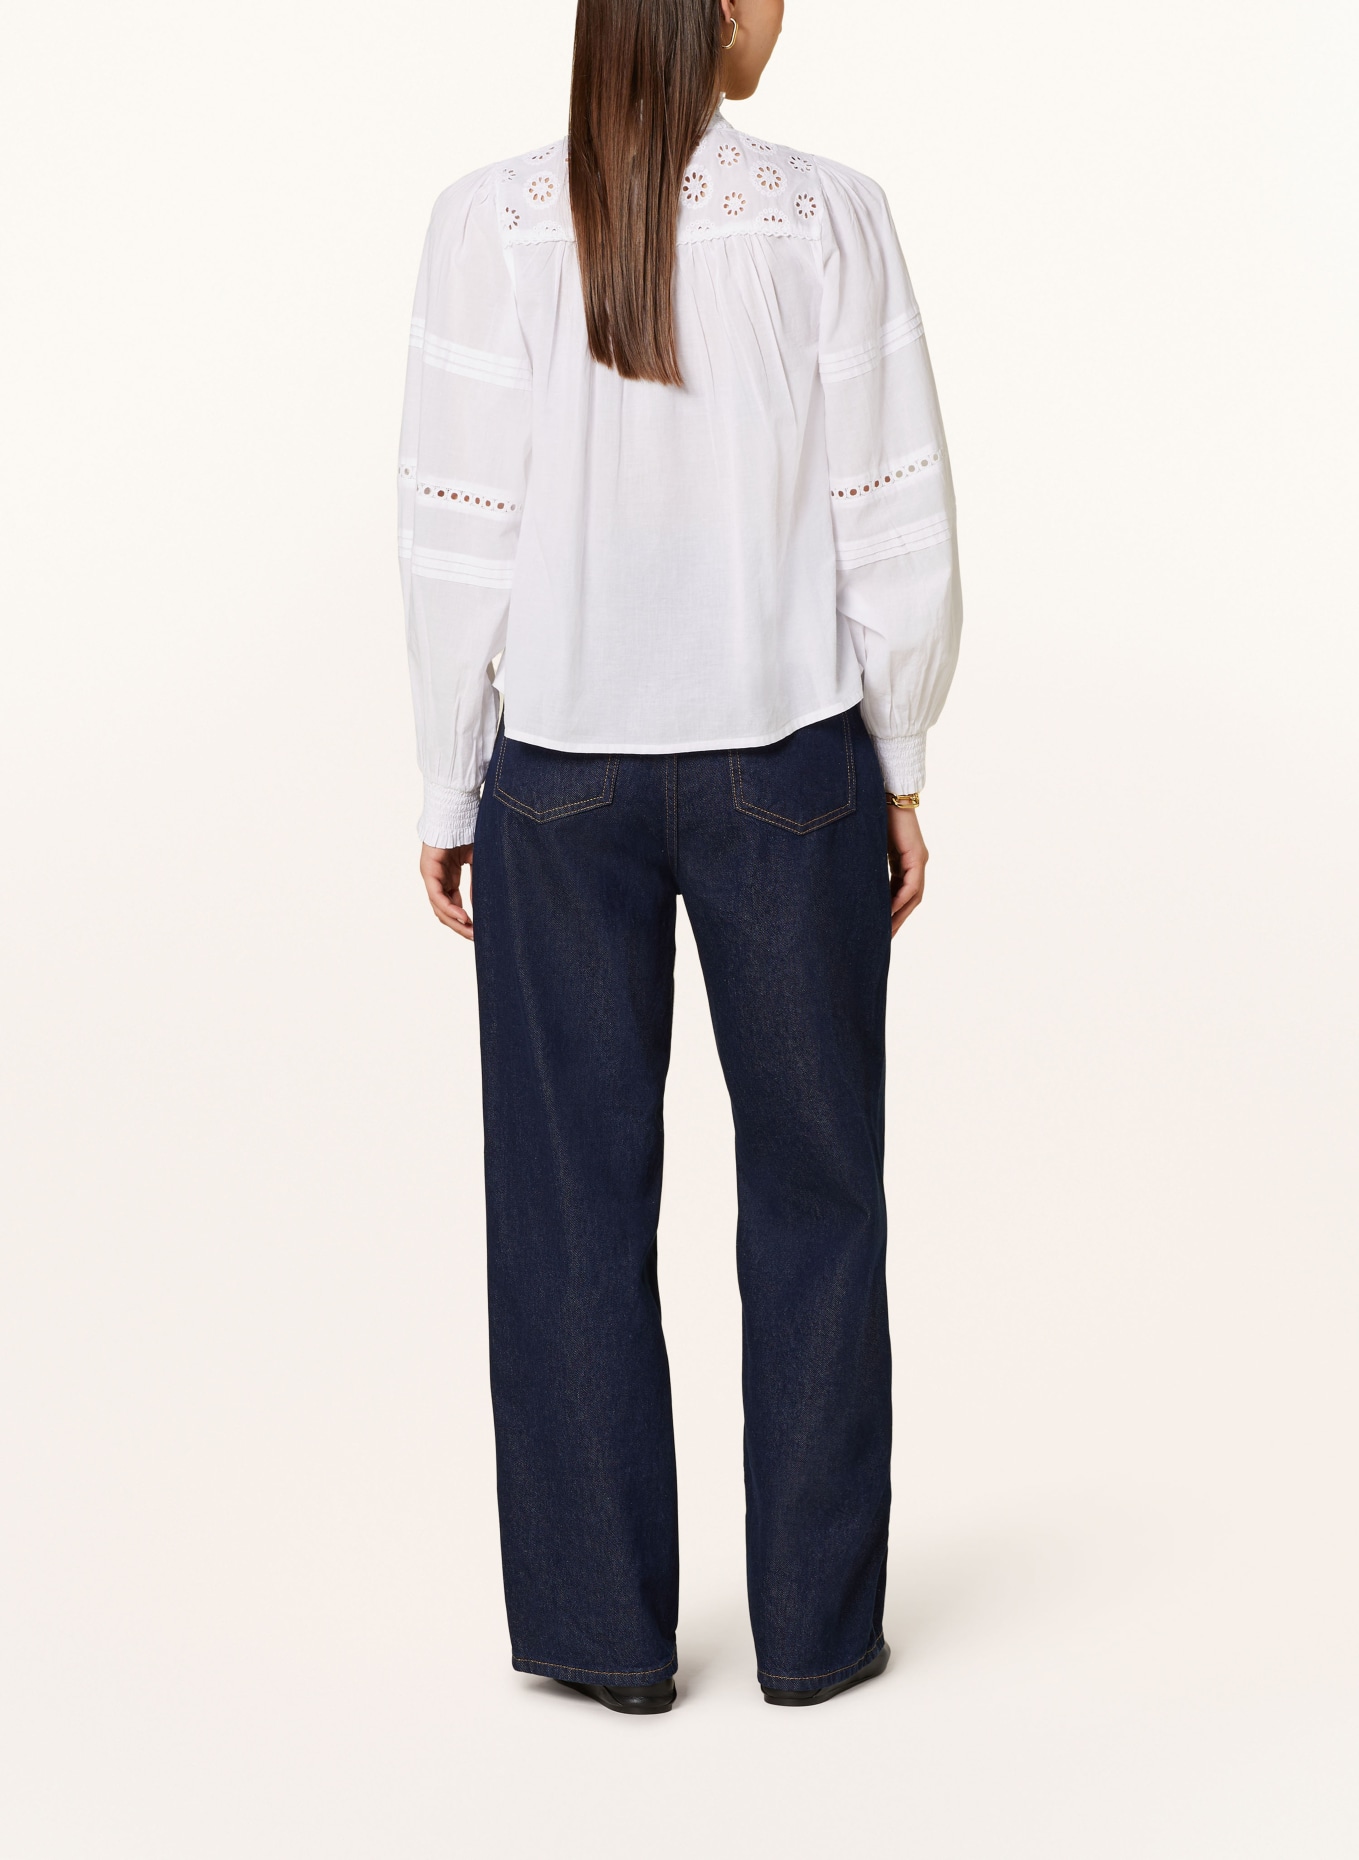 NEO NOIR Shirt blouse EMILY with broderie anglaise, Color: WHITE (Image 3)